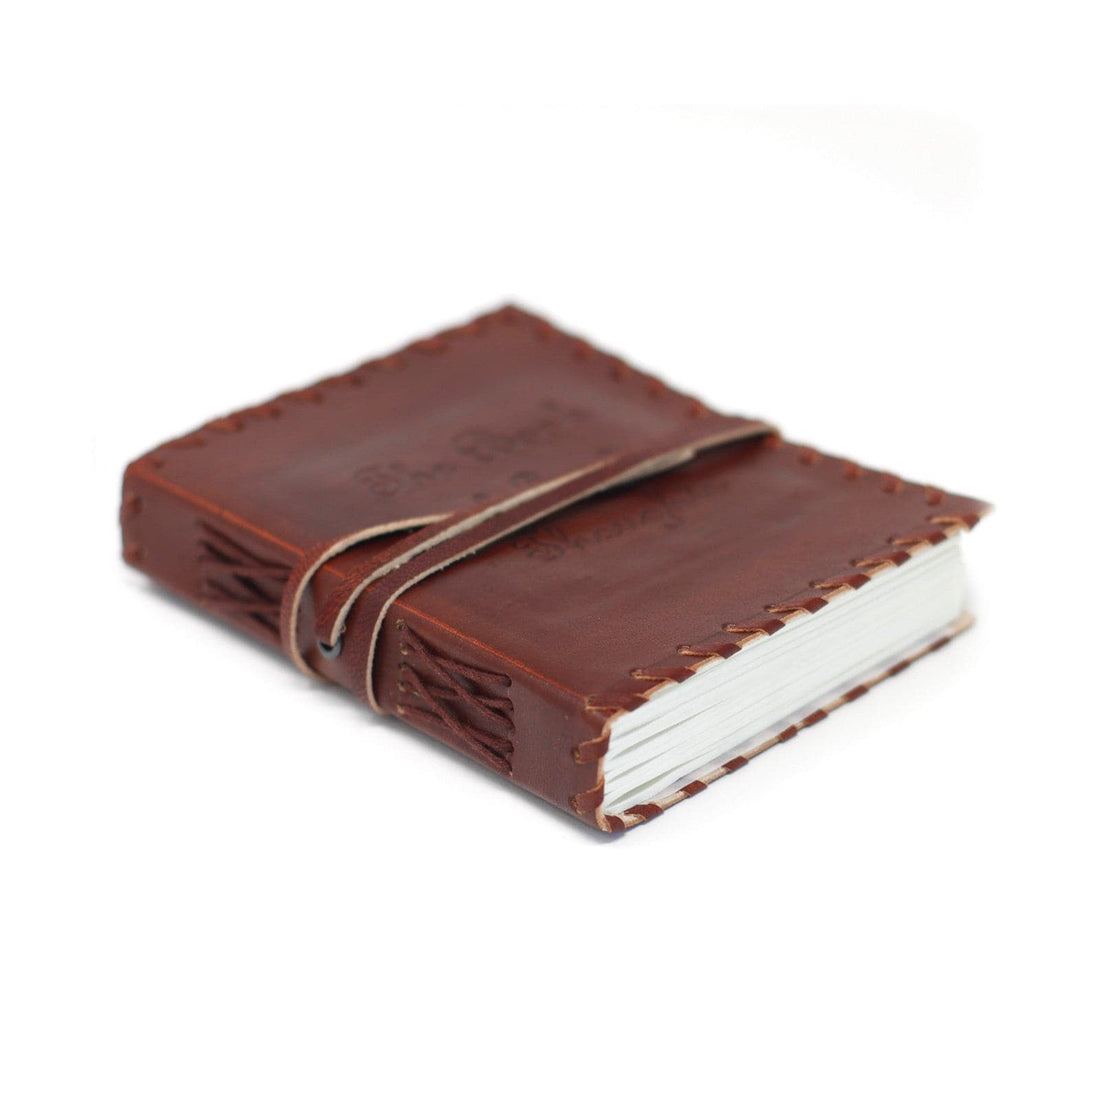 Leather Book of Thoughts with Wrap Notebook (15x10") - best price from Maltashopper.com LBN-07